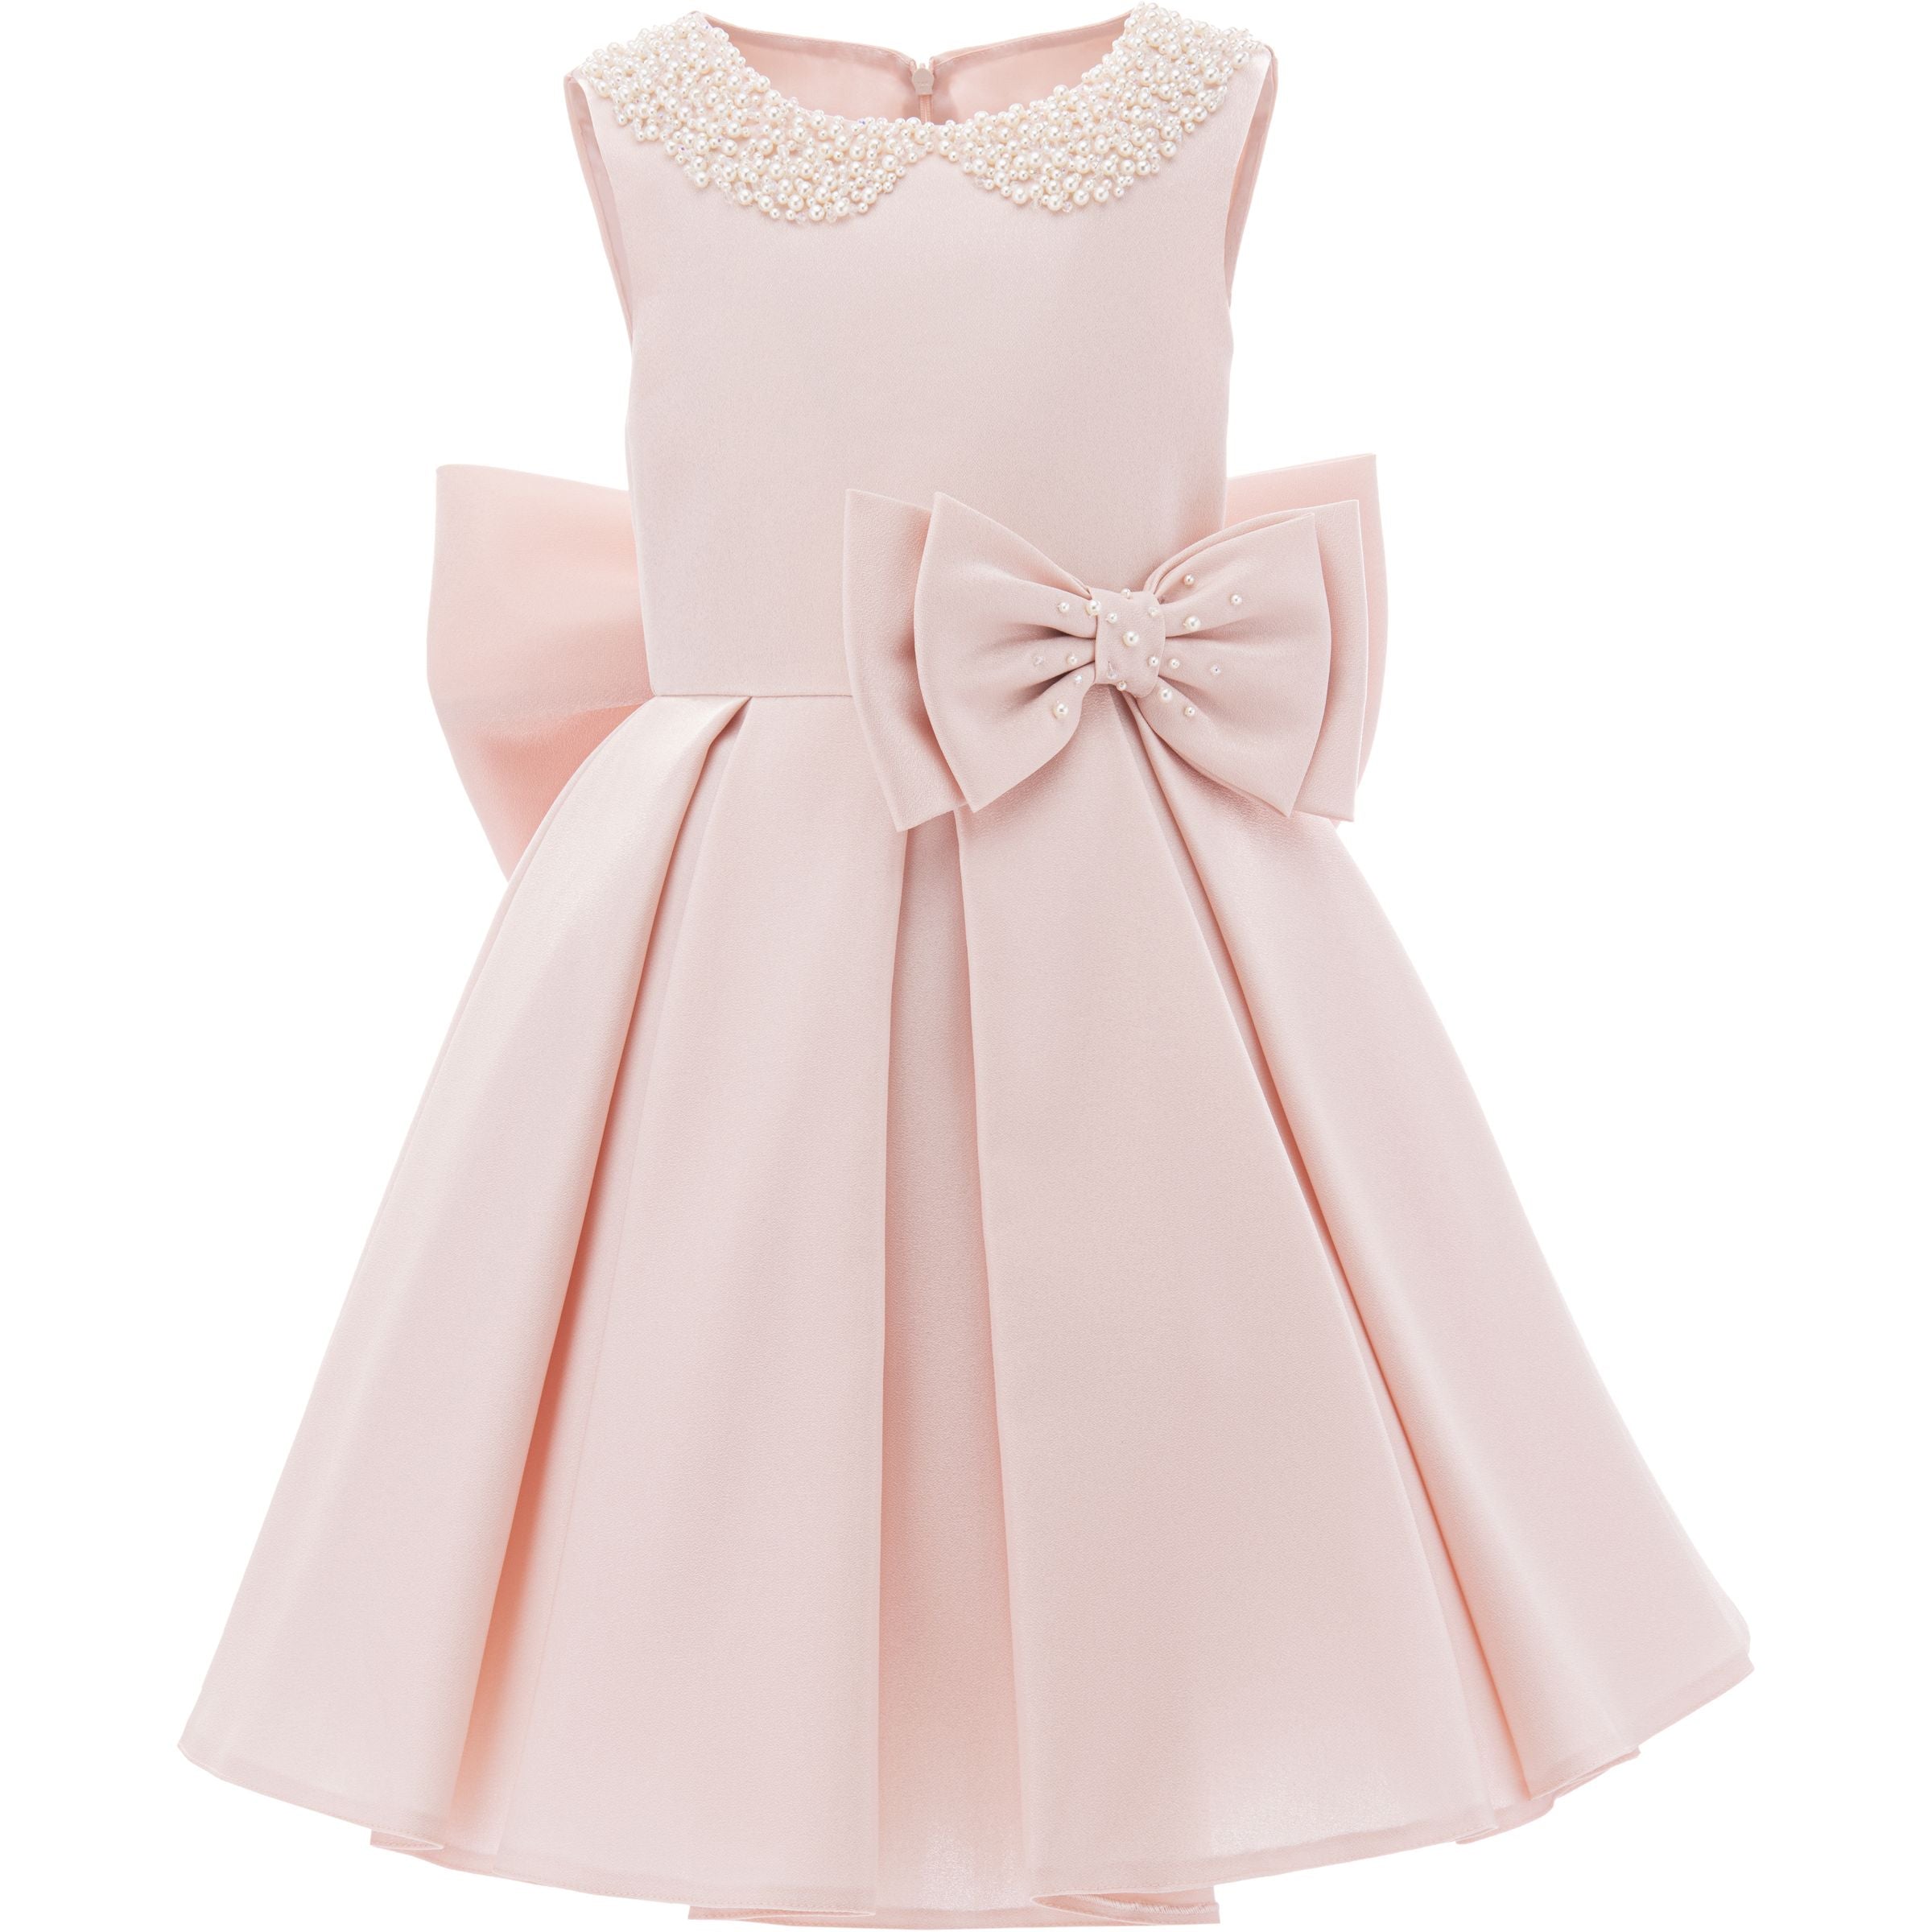 kids-atelier-tulleen-kid-girl-pink-melinda-pearl-double-bow-dress-2997-soft-pink